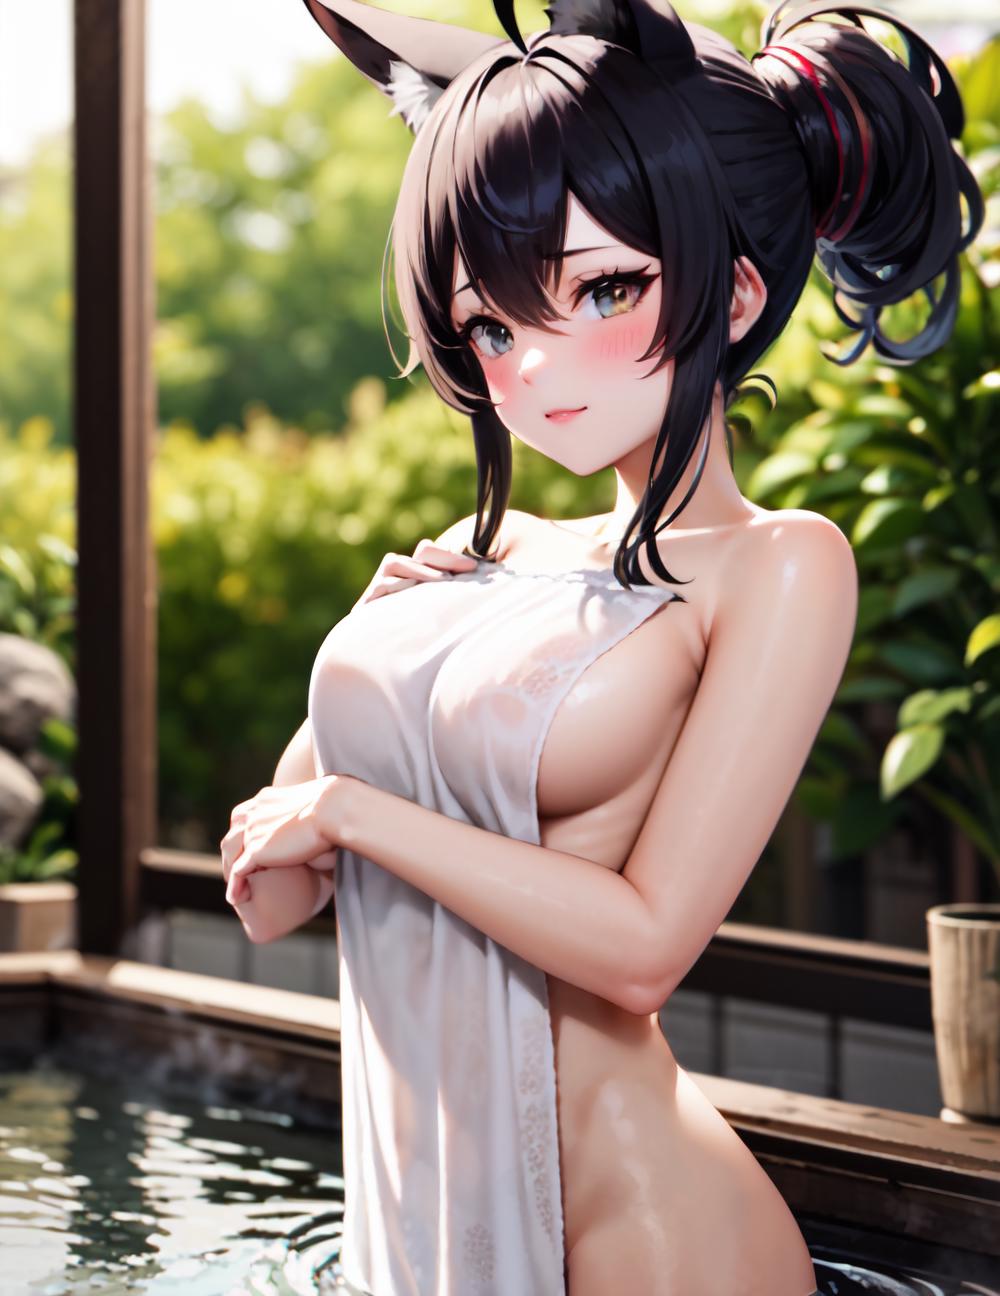 Anime character in a white towel, posing with a pout and a smile.